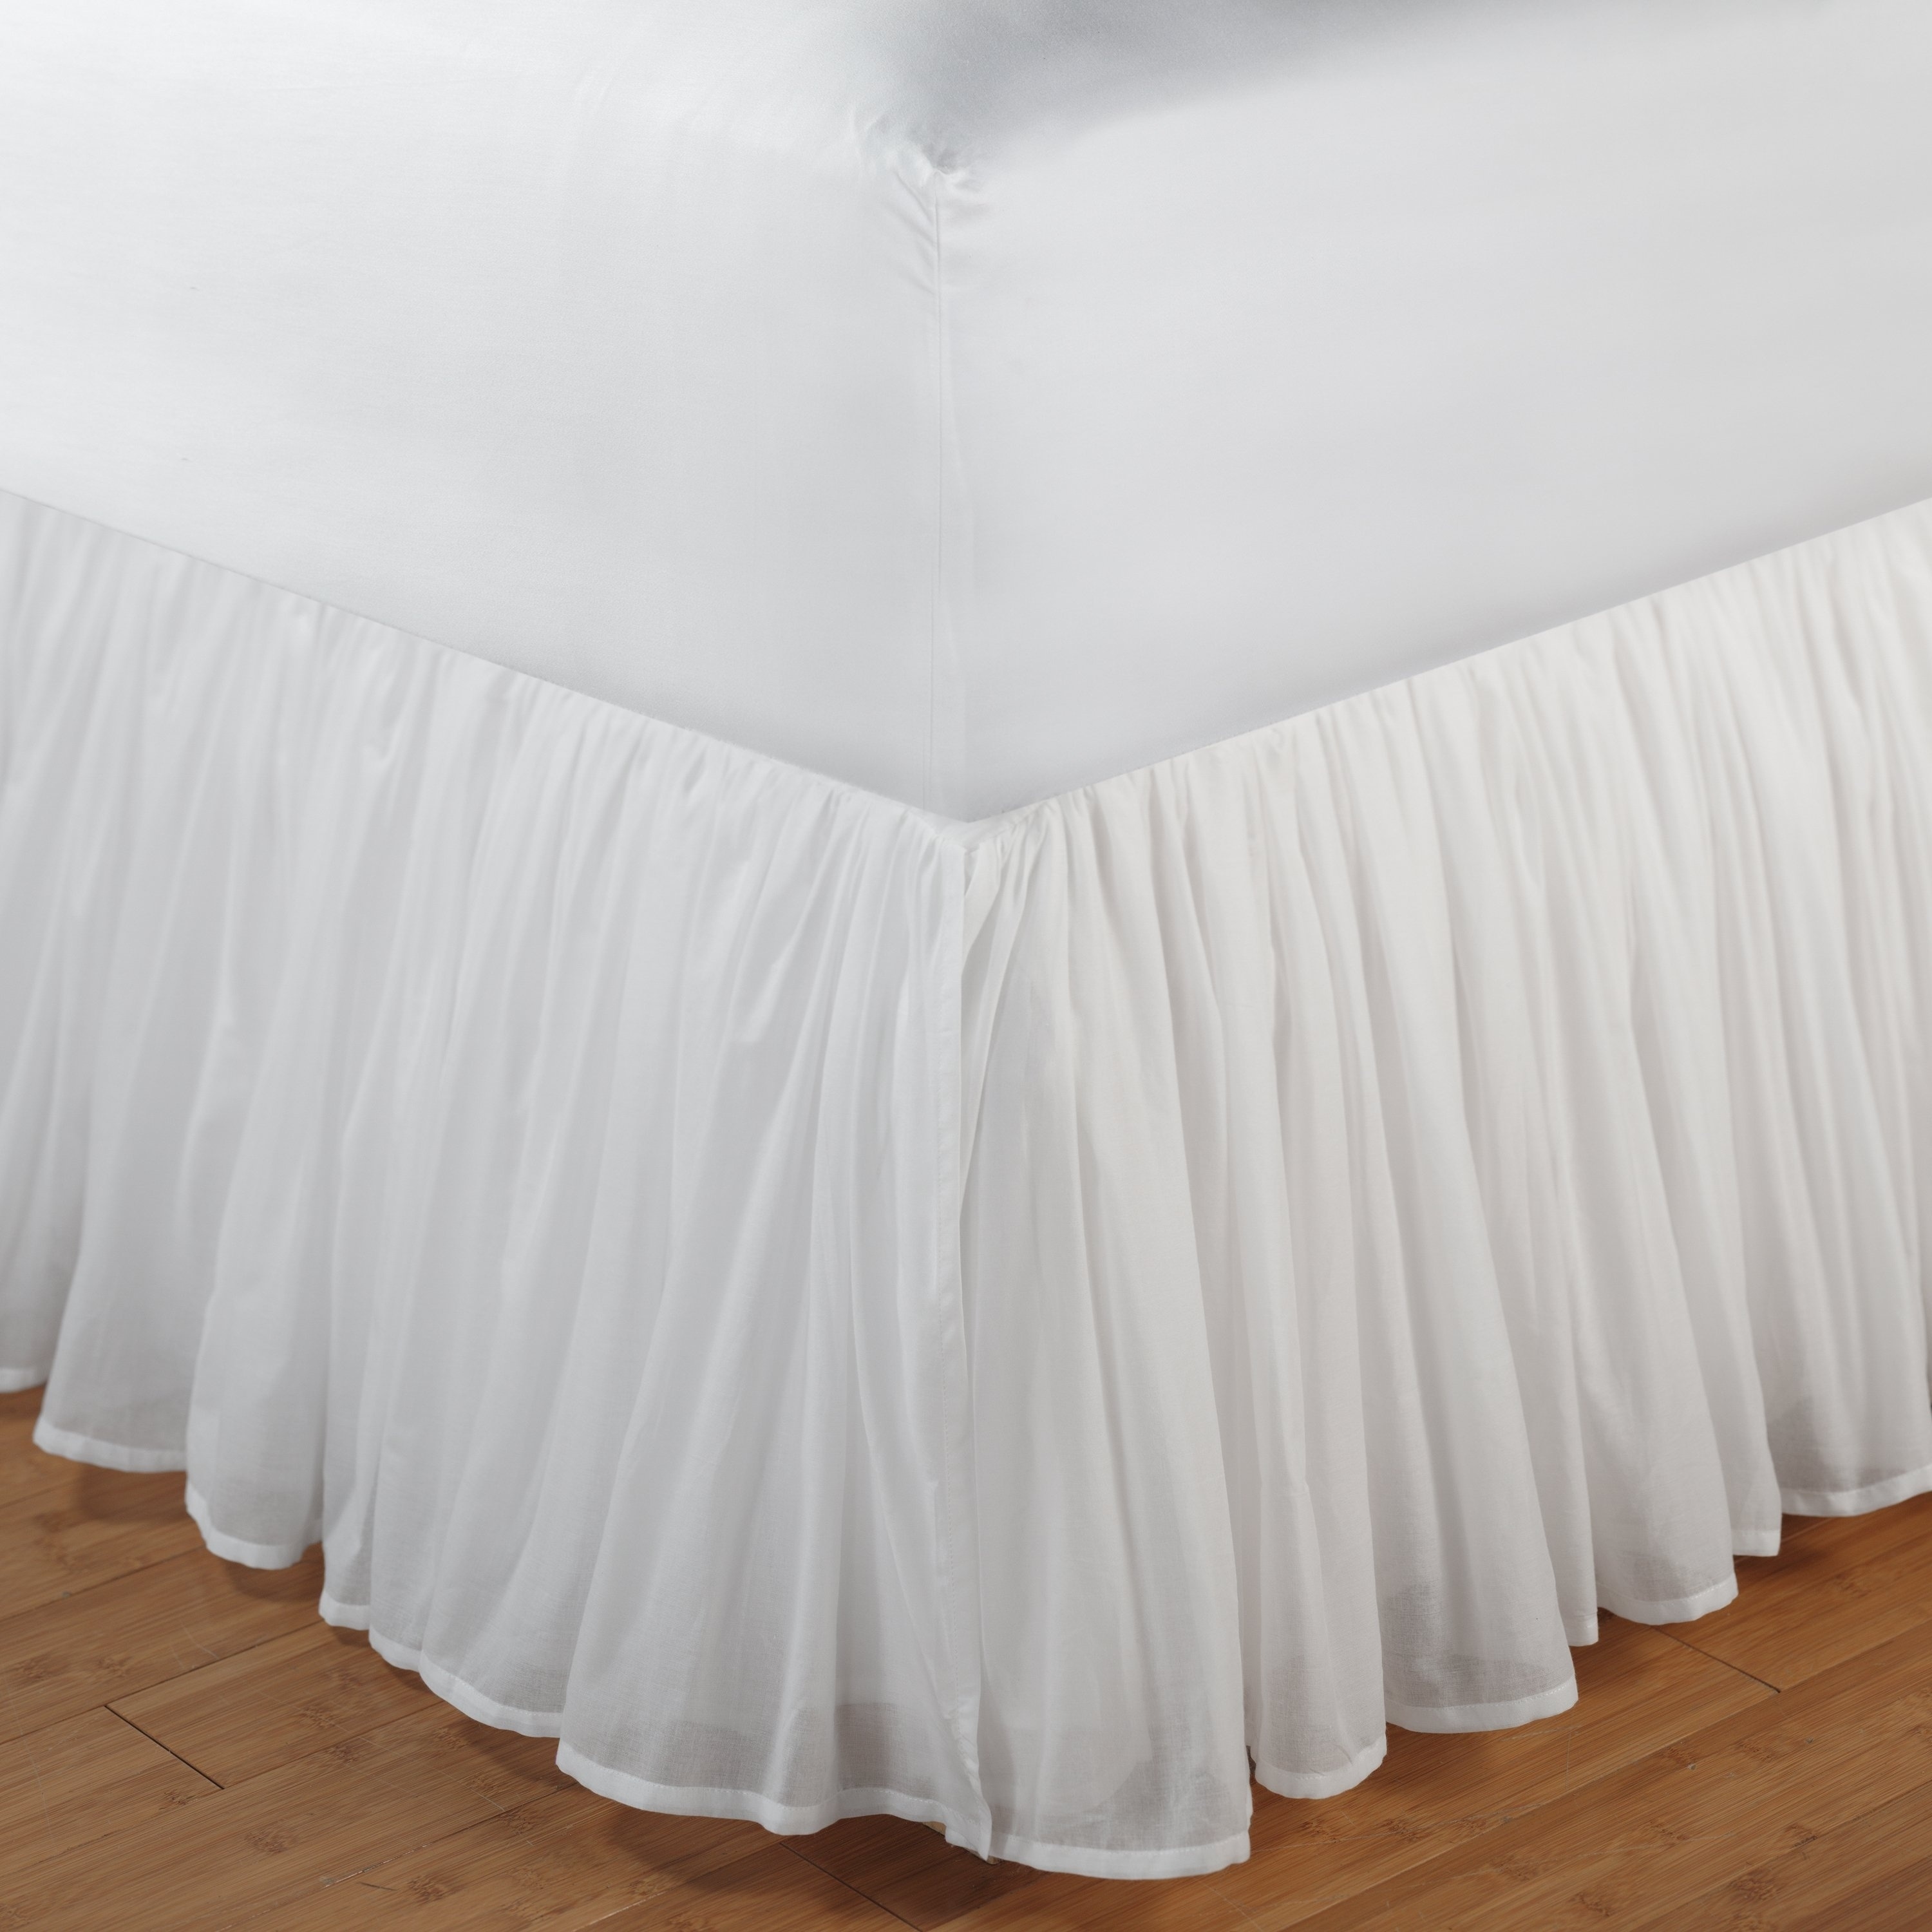 Zhiyuan 3 Layer Lace Ruffle Bed Skirt with Top Platform and 2 Pillowcases Set Gray Double